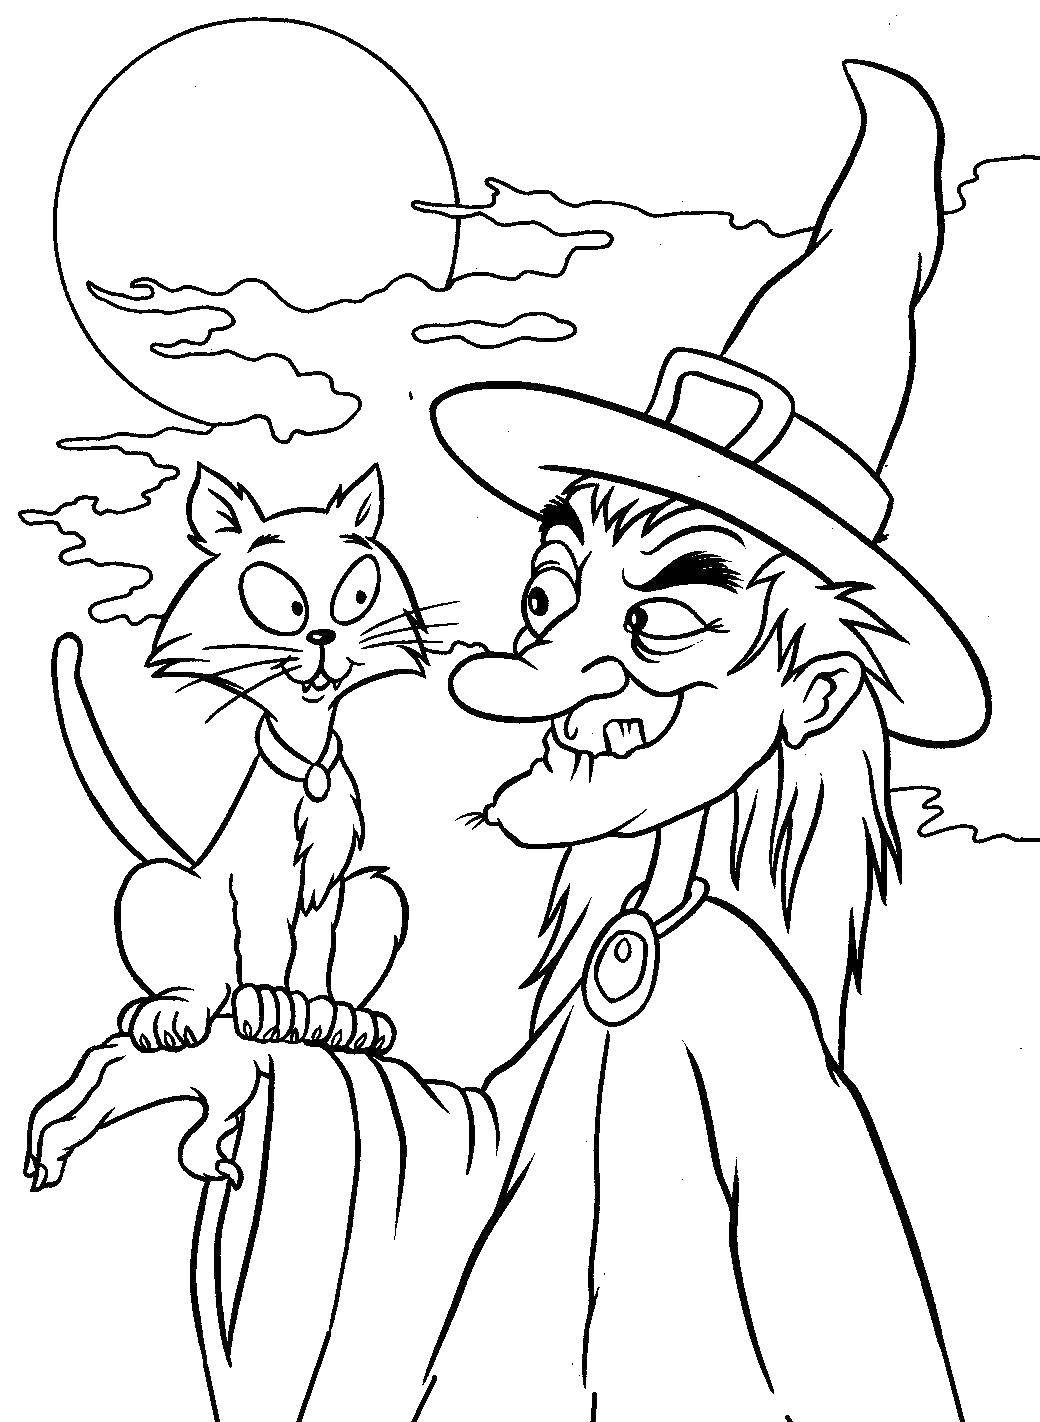 Coloring Cartoon puzzle. Category witch. Tags:  Puzzle, cartoon.